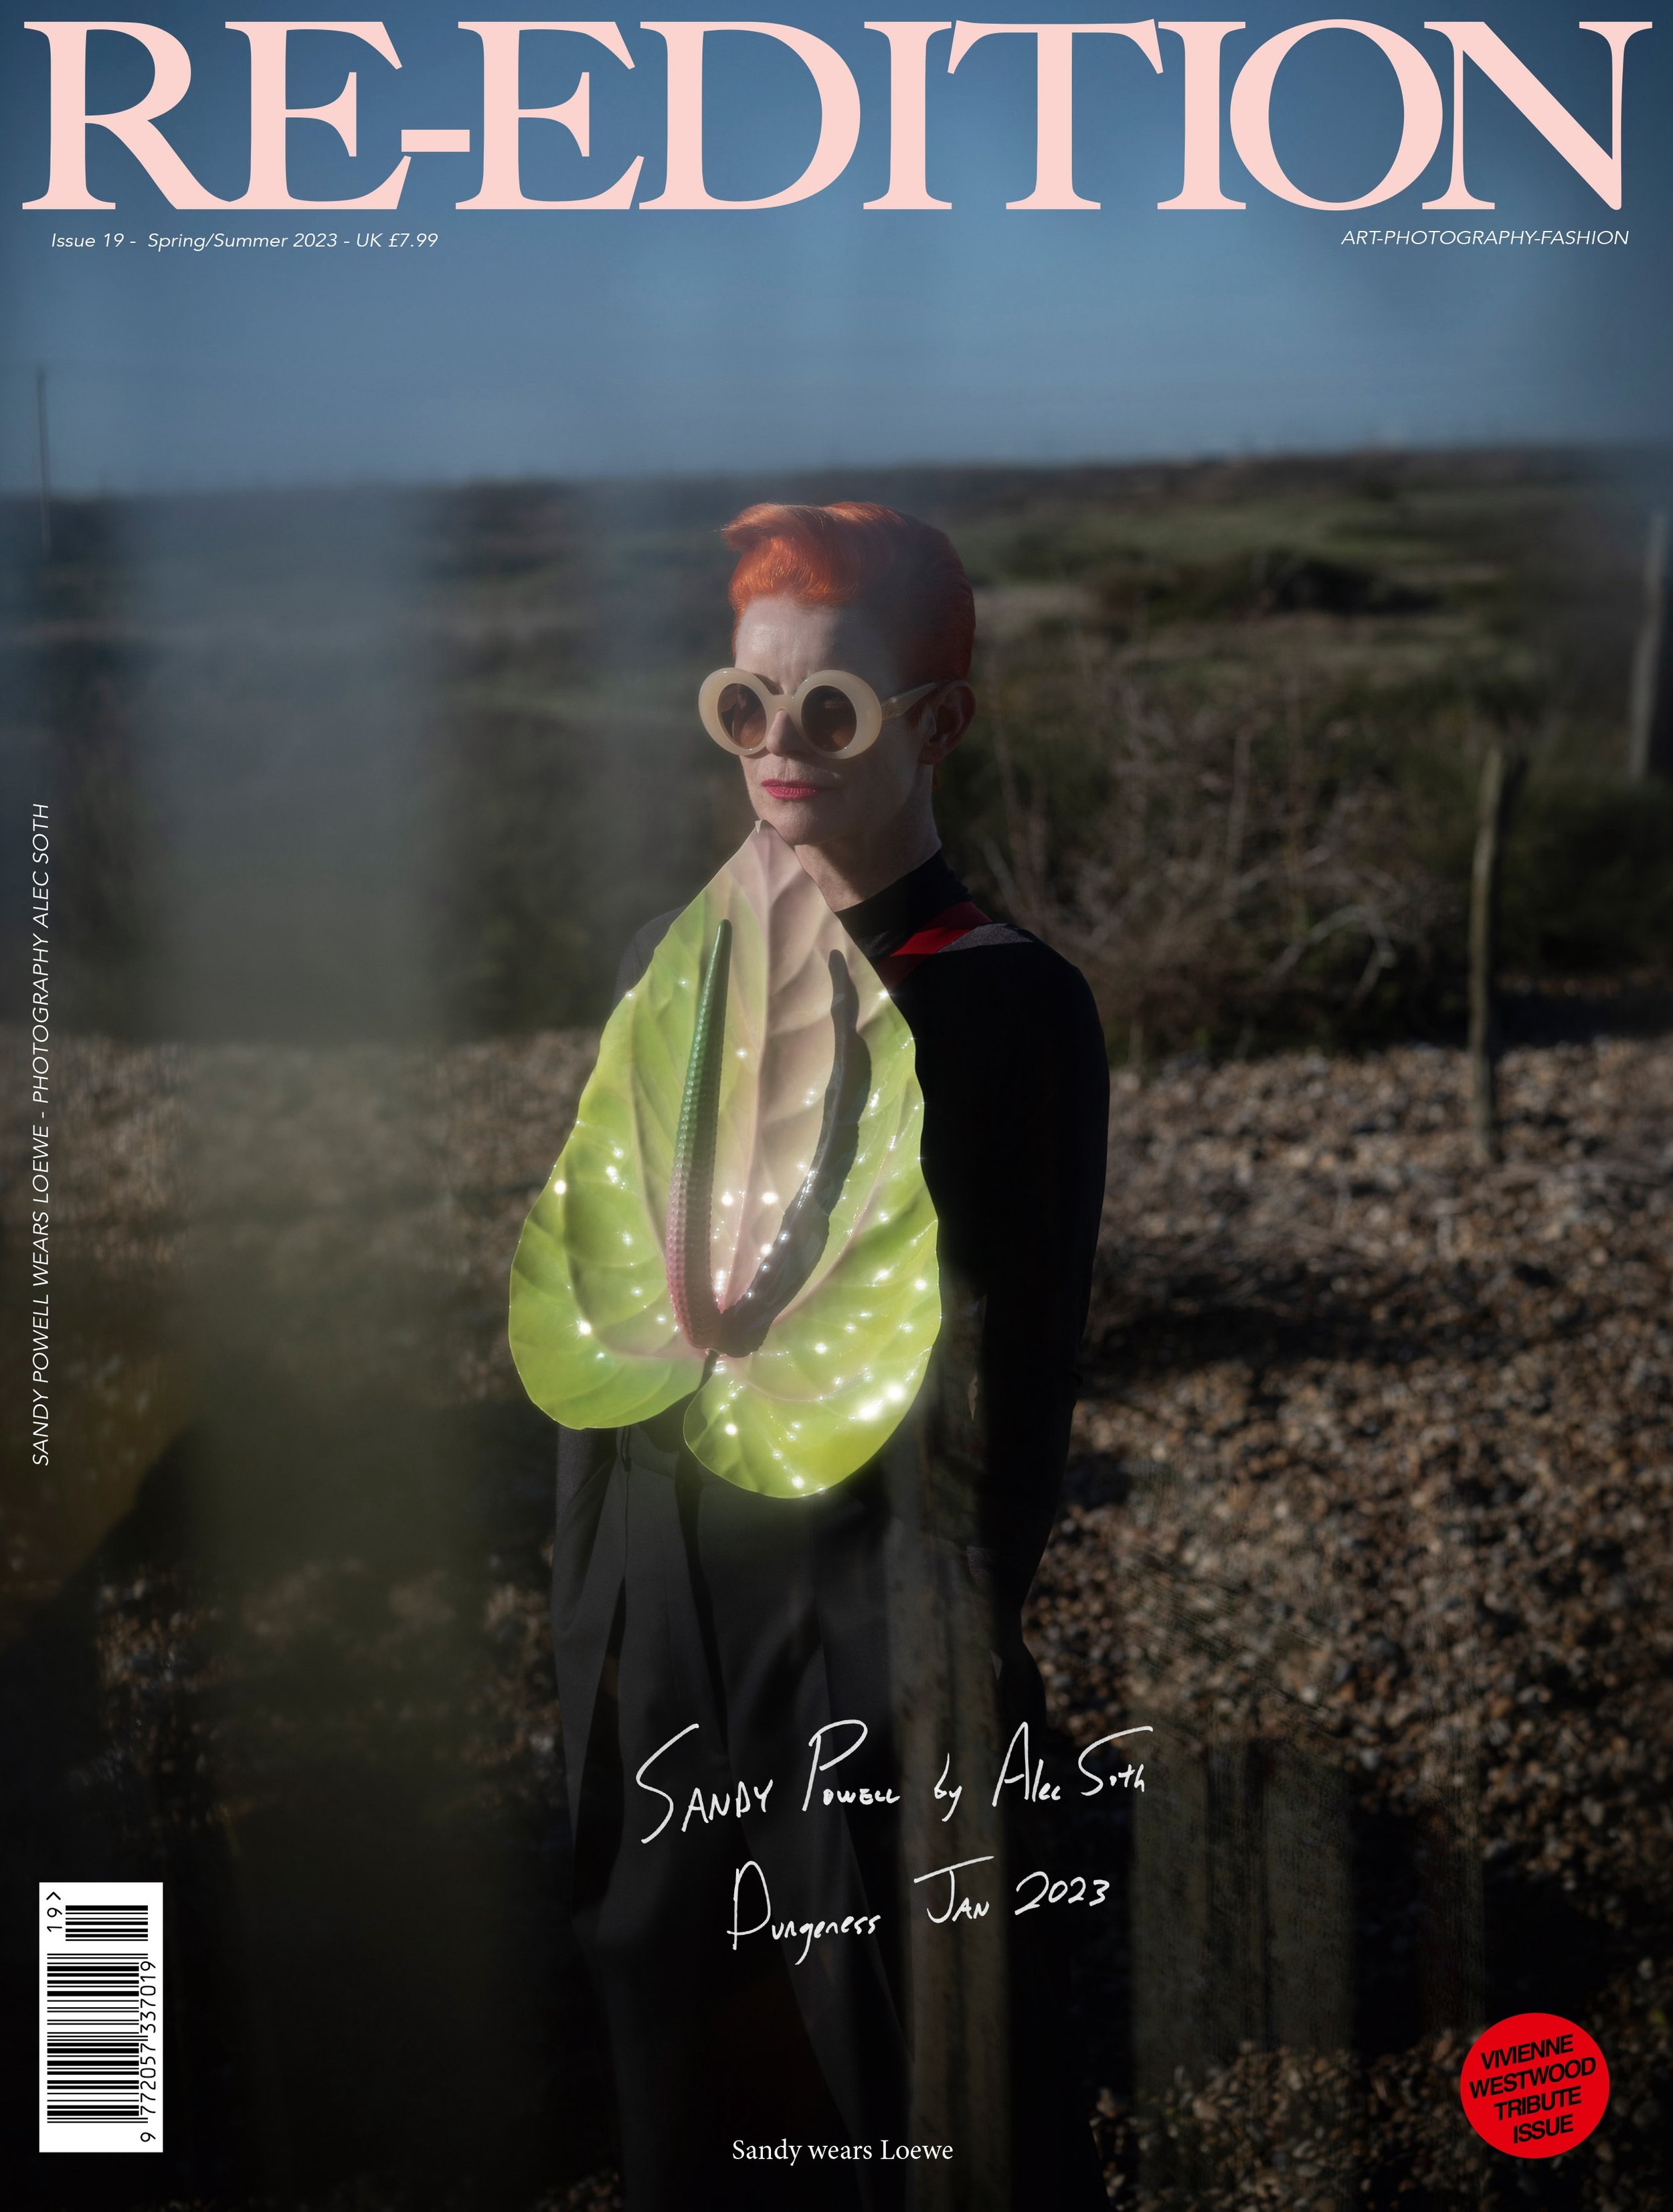 SANDY POWELL ALEC SOTH RE-EDITION DEAN MAYO DAVIES COVER 01.jpg